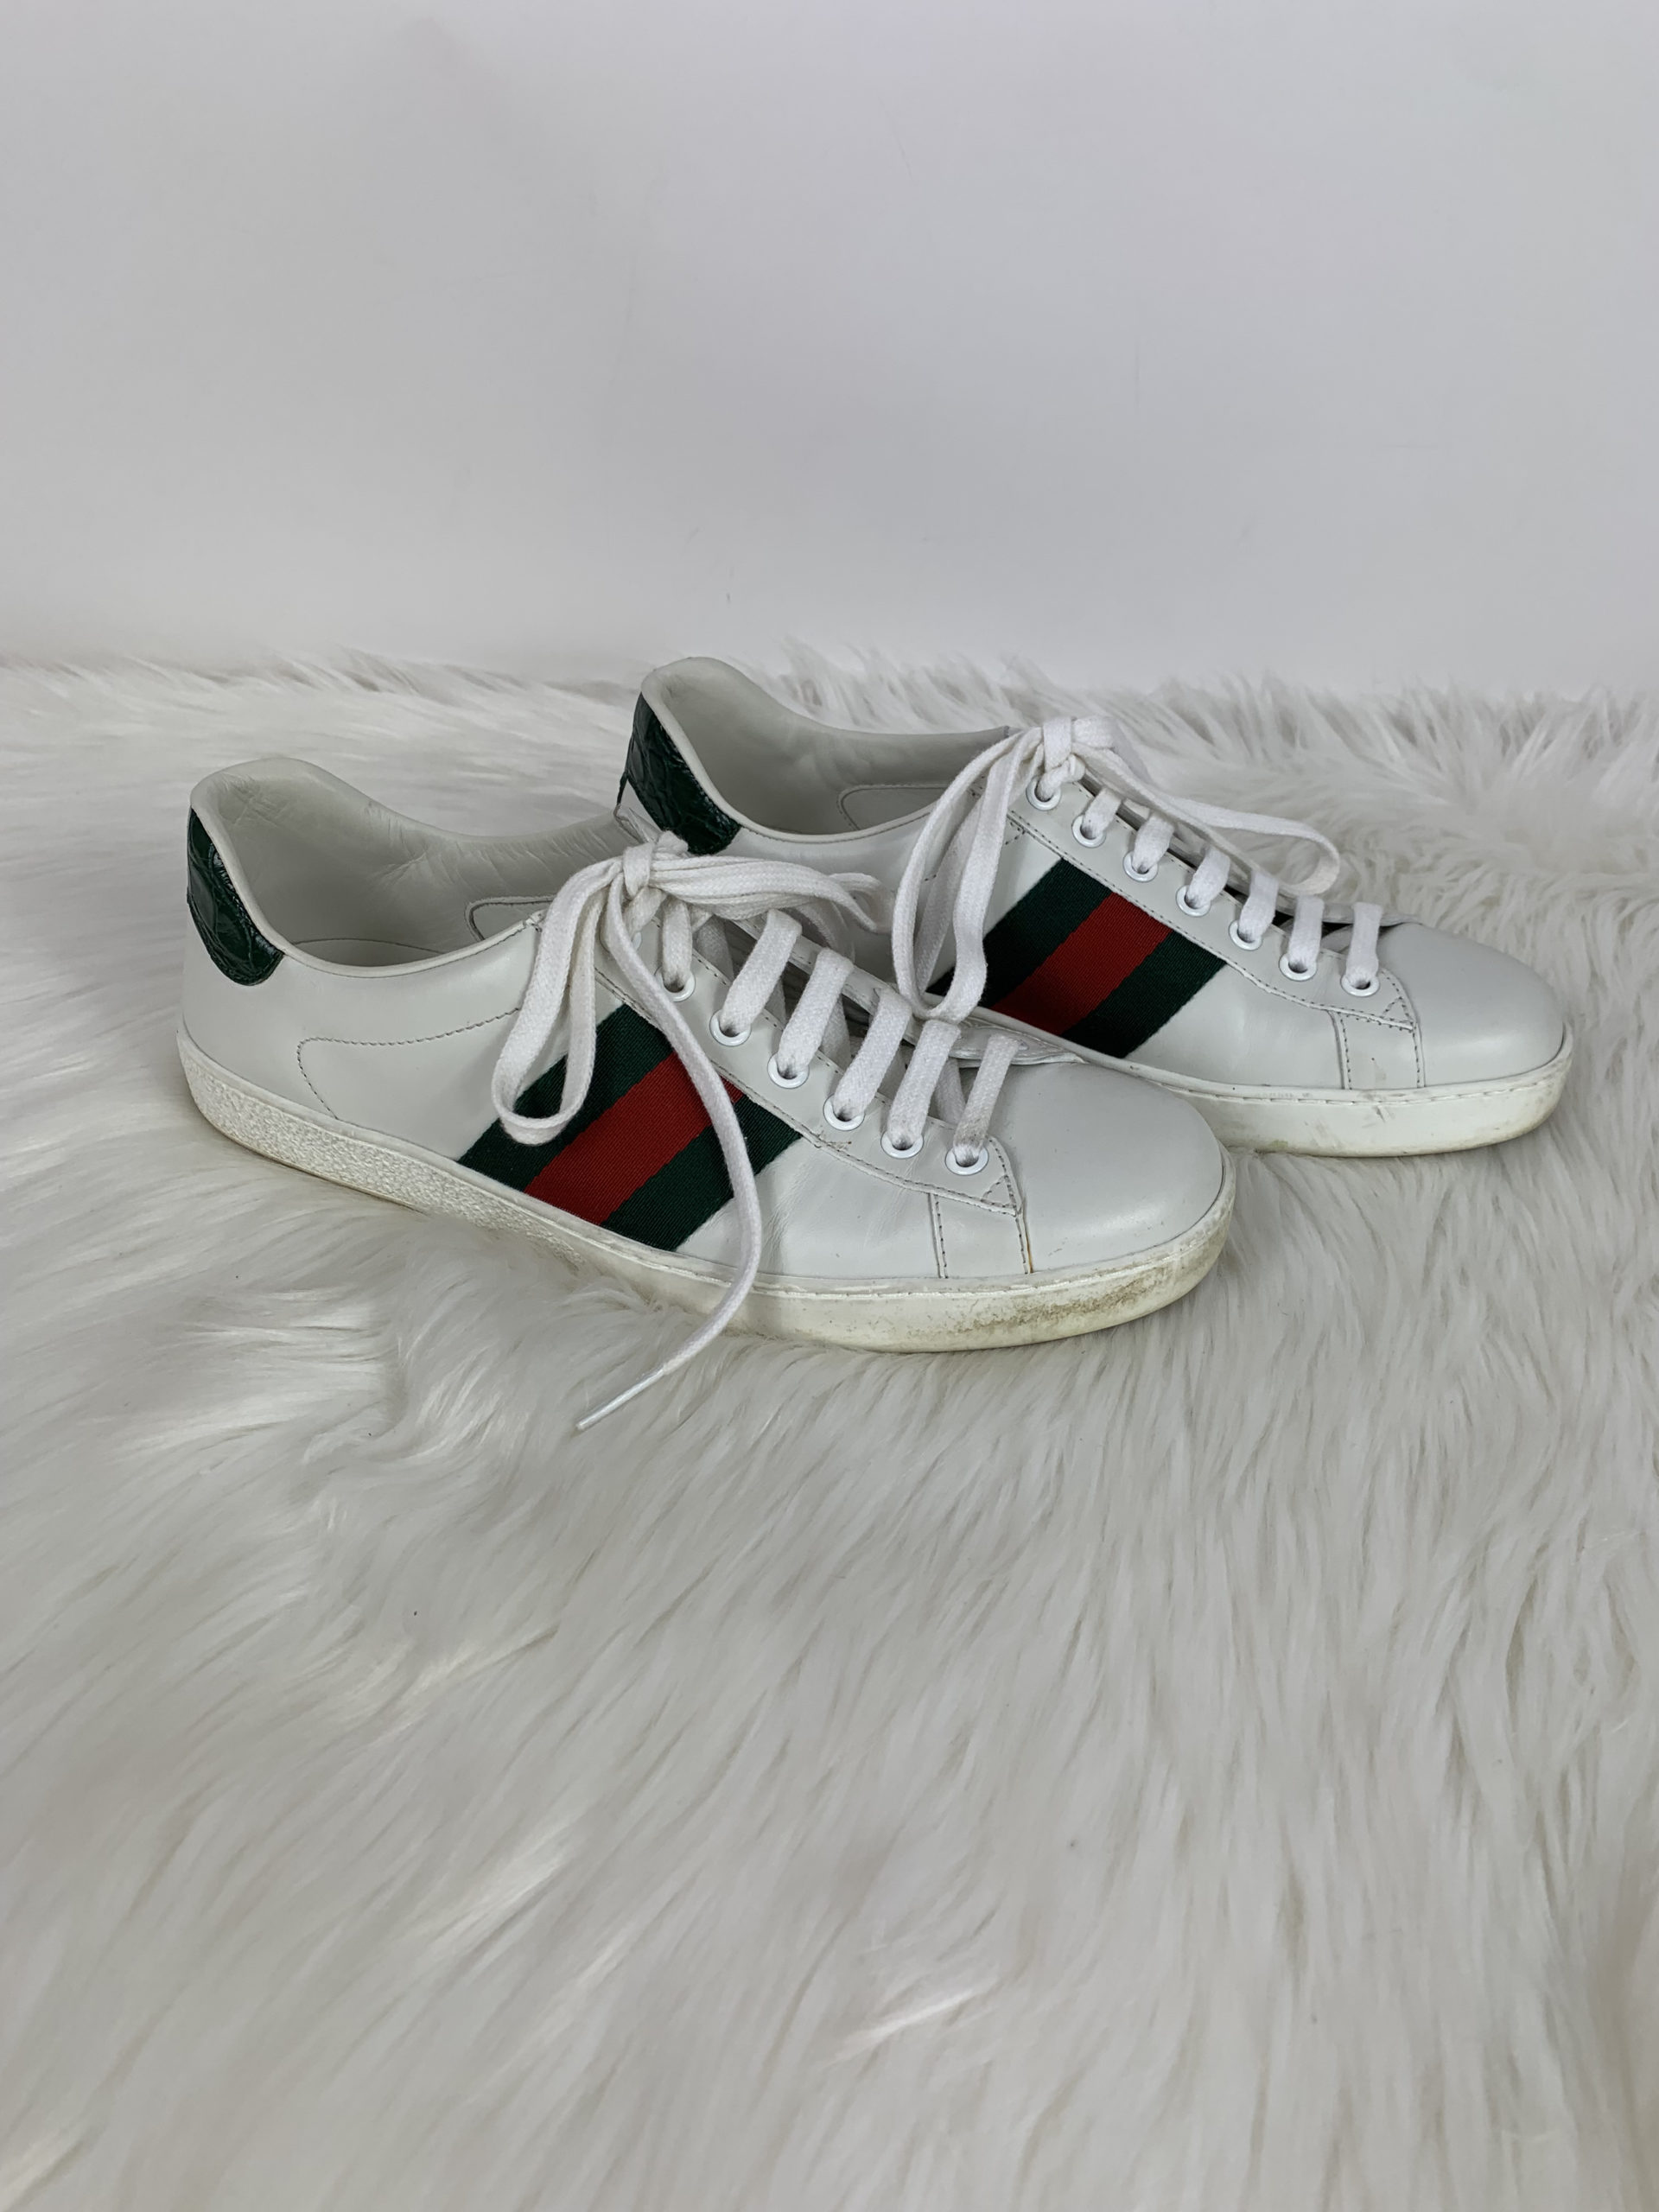 Streng Verfrissend Tact Gucci White Leather Ace Sneakers – Changes Luxury Consignment